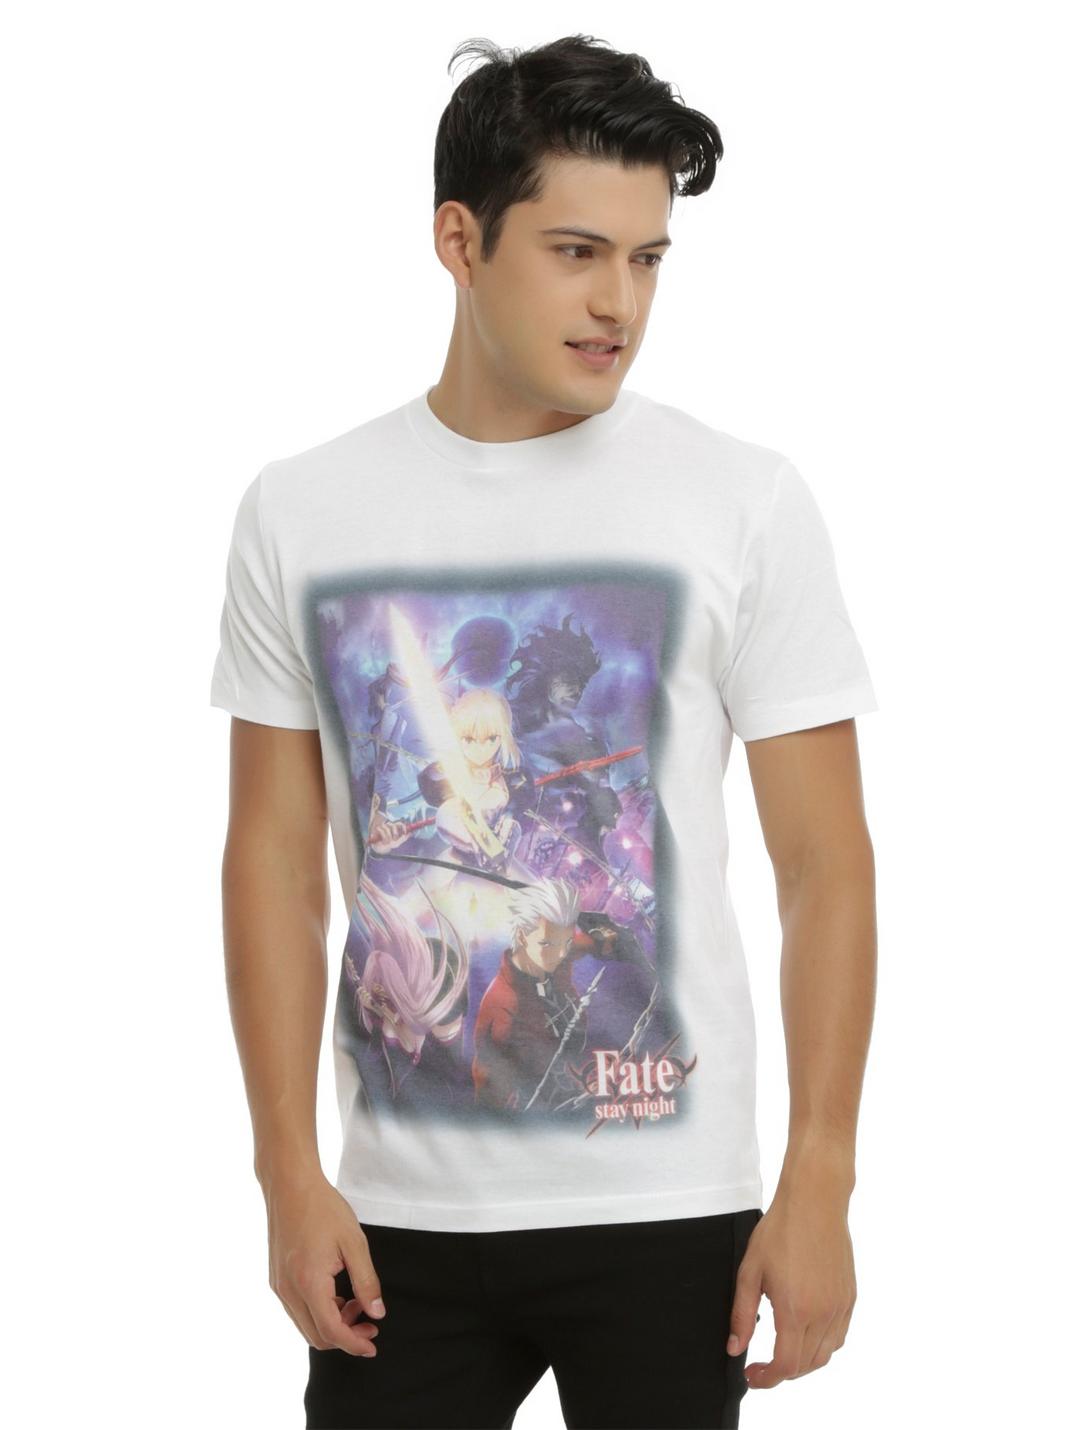 Fate/Stay Night: Unlimited Blade Works Sublimation T-Shirt, BLACK, hi-res